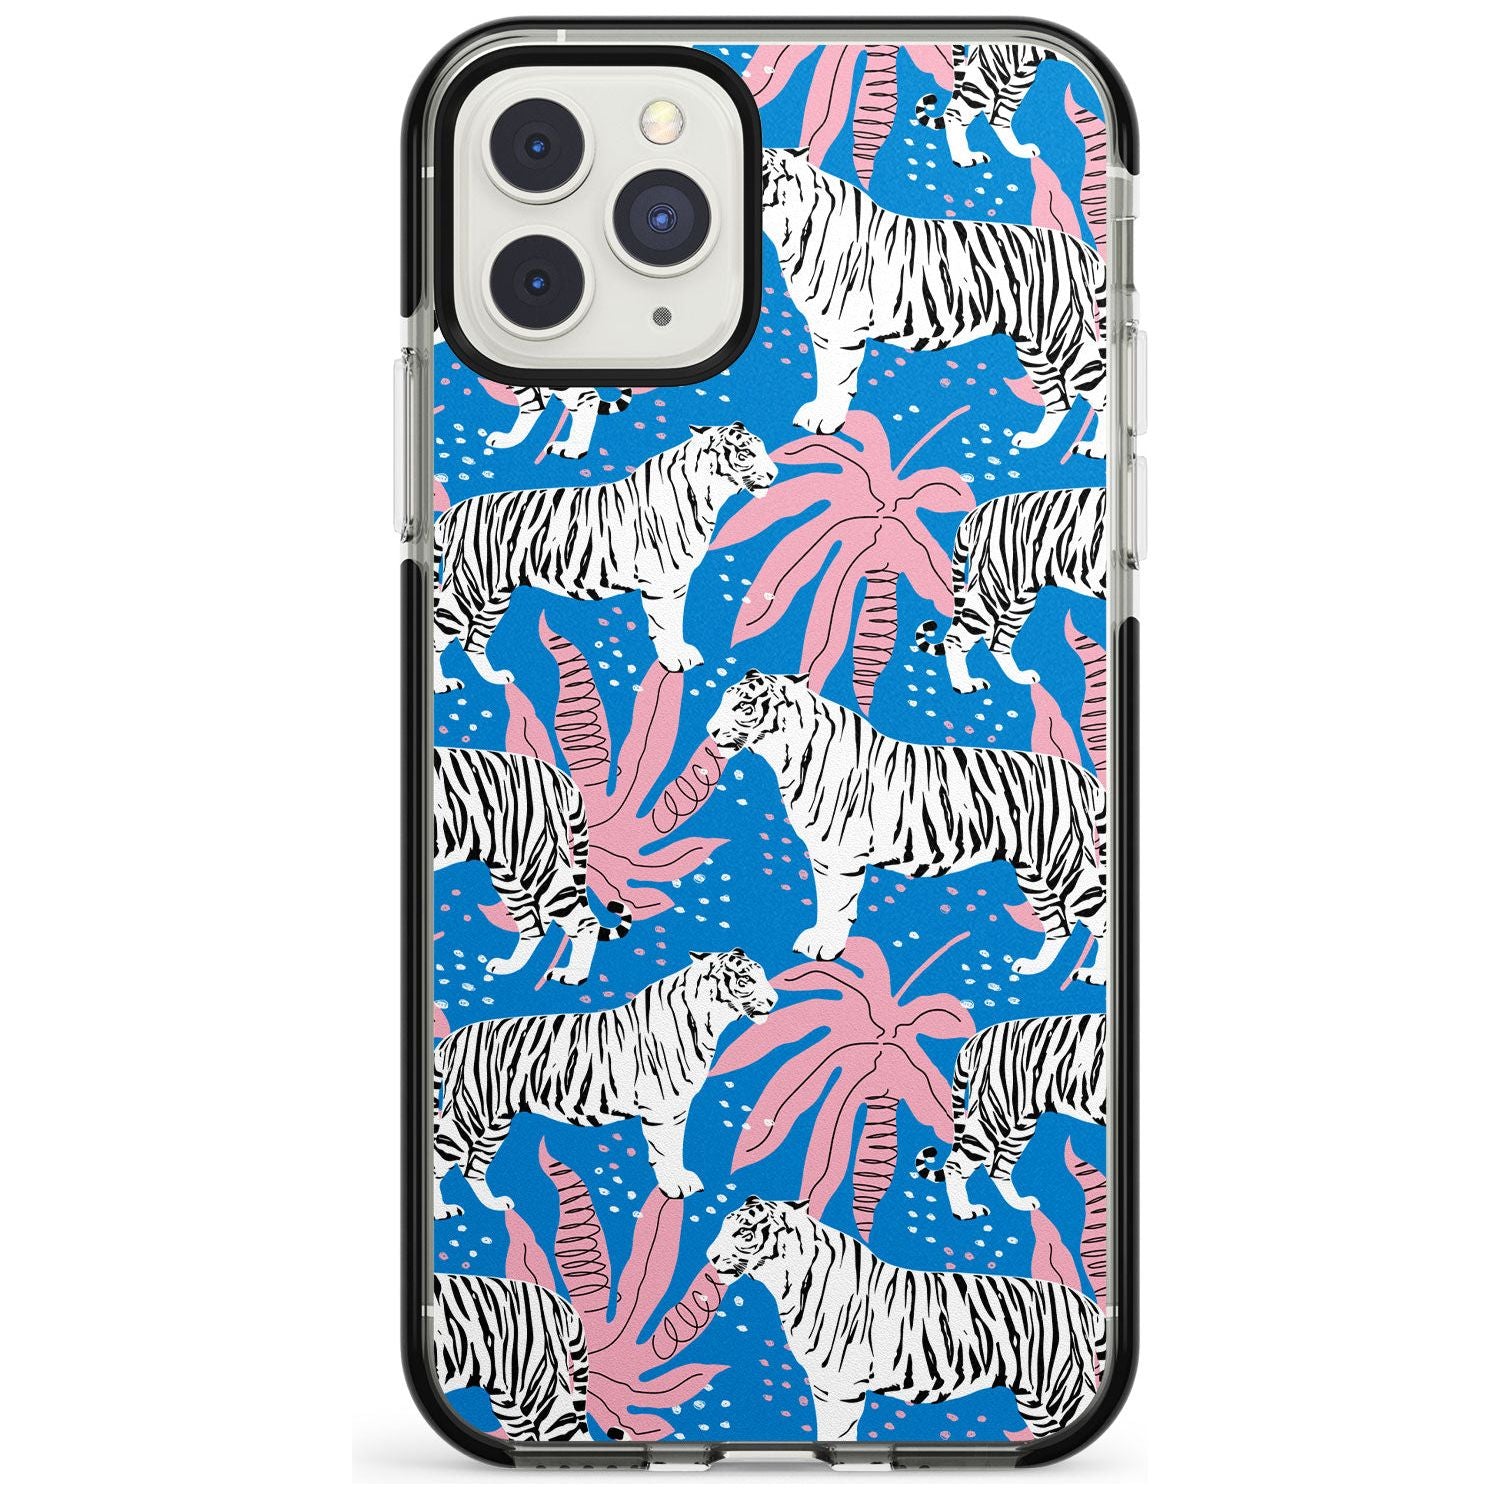 Bengal Blues Black Impact Phone Case for iPhone 11 Pro Max